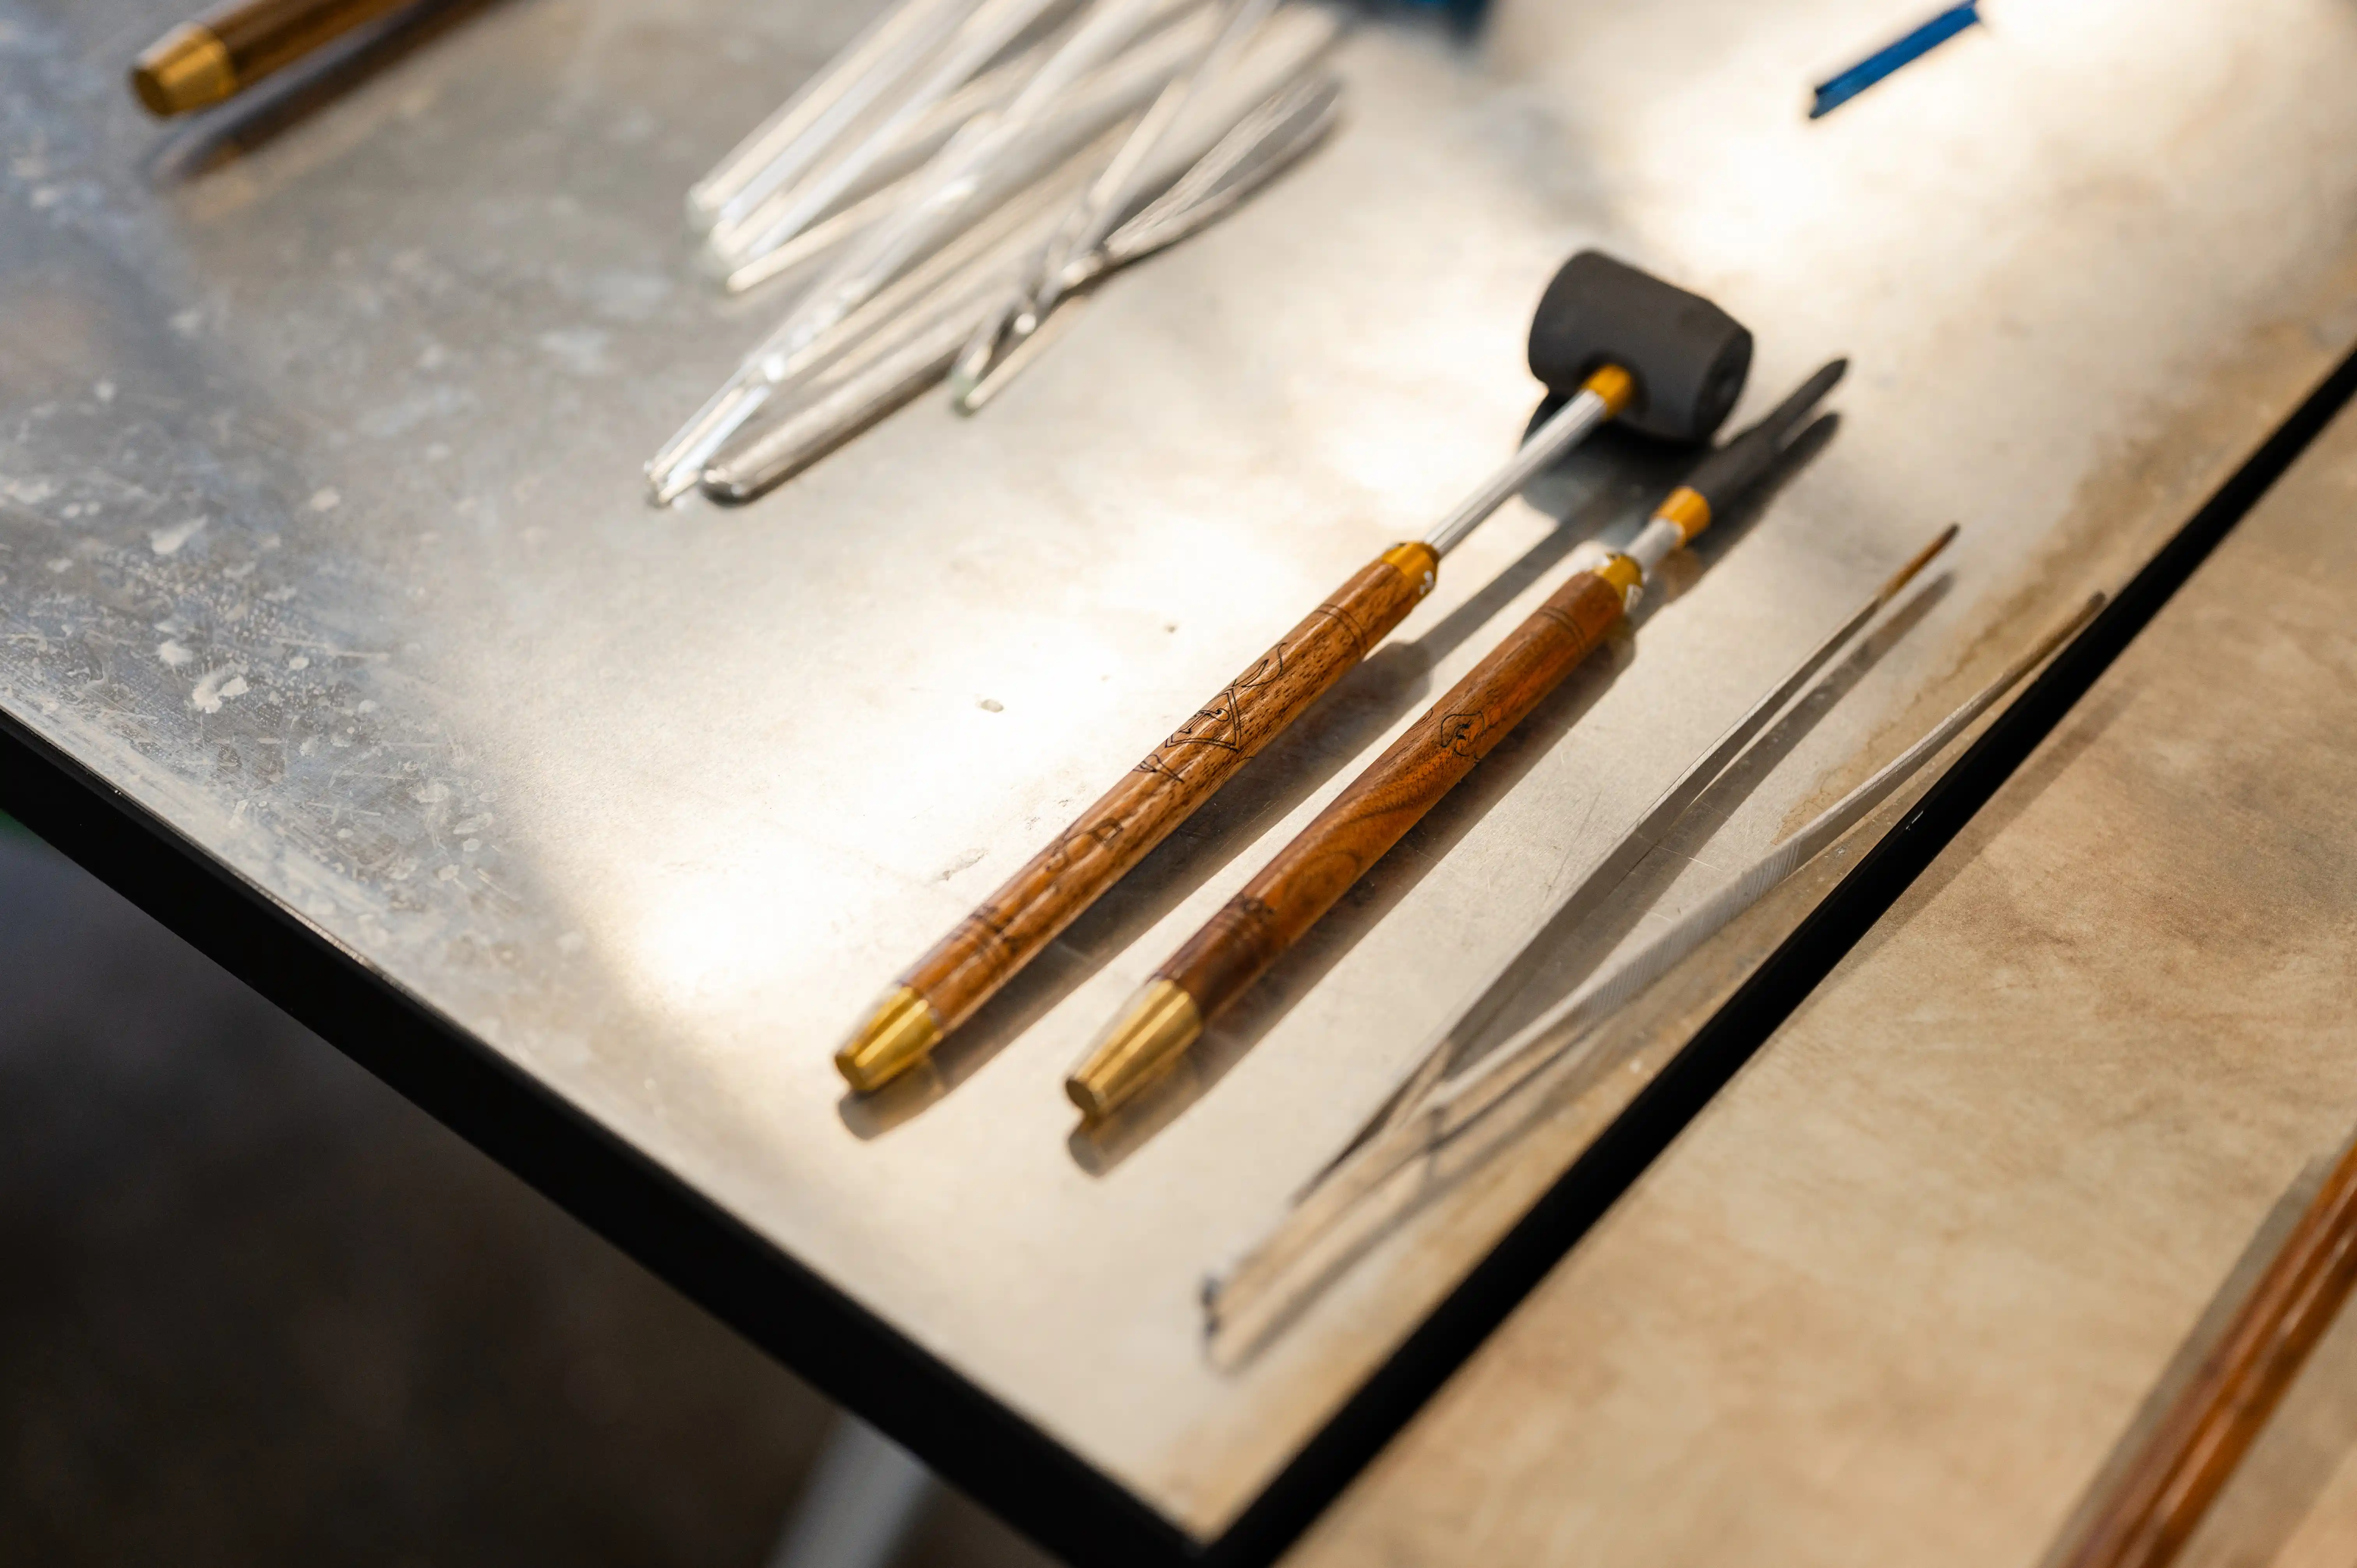 Assorted jewelry making tools including metal files and a hammer on a workbench.